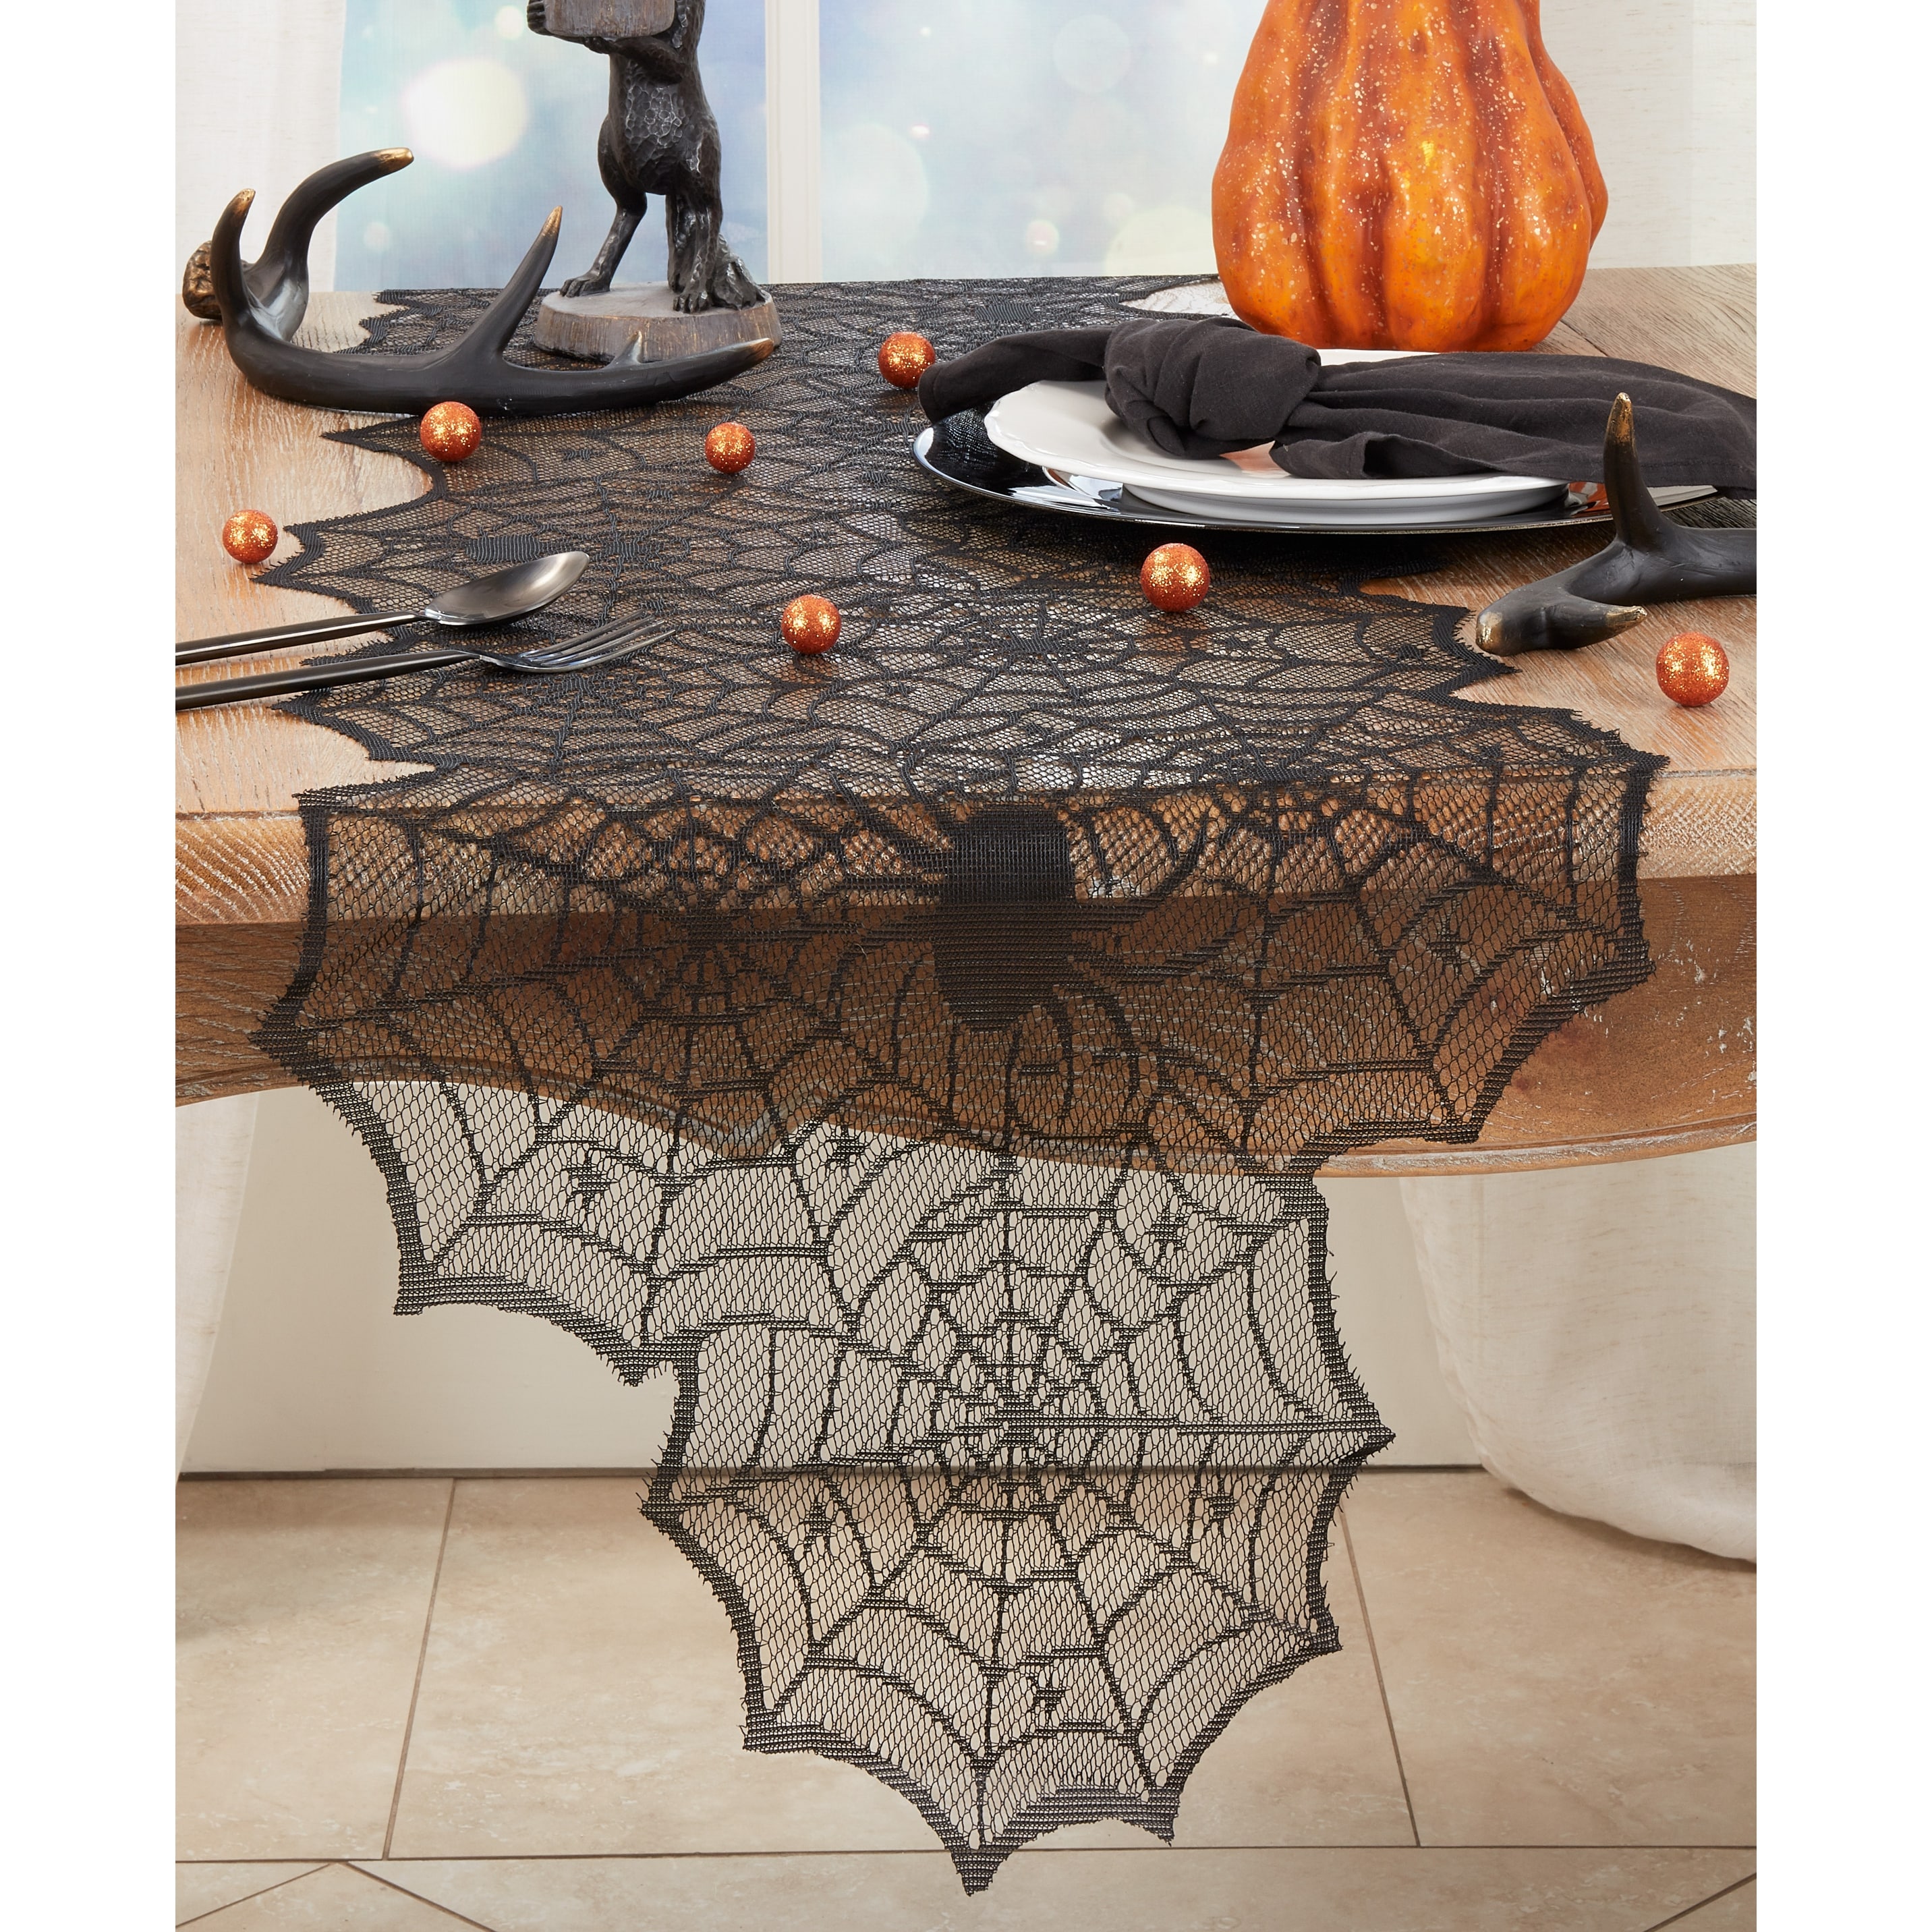 Ghostly Charm Spiderweb Net Table Runner - 18" x 72"